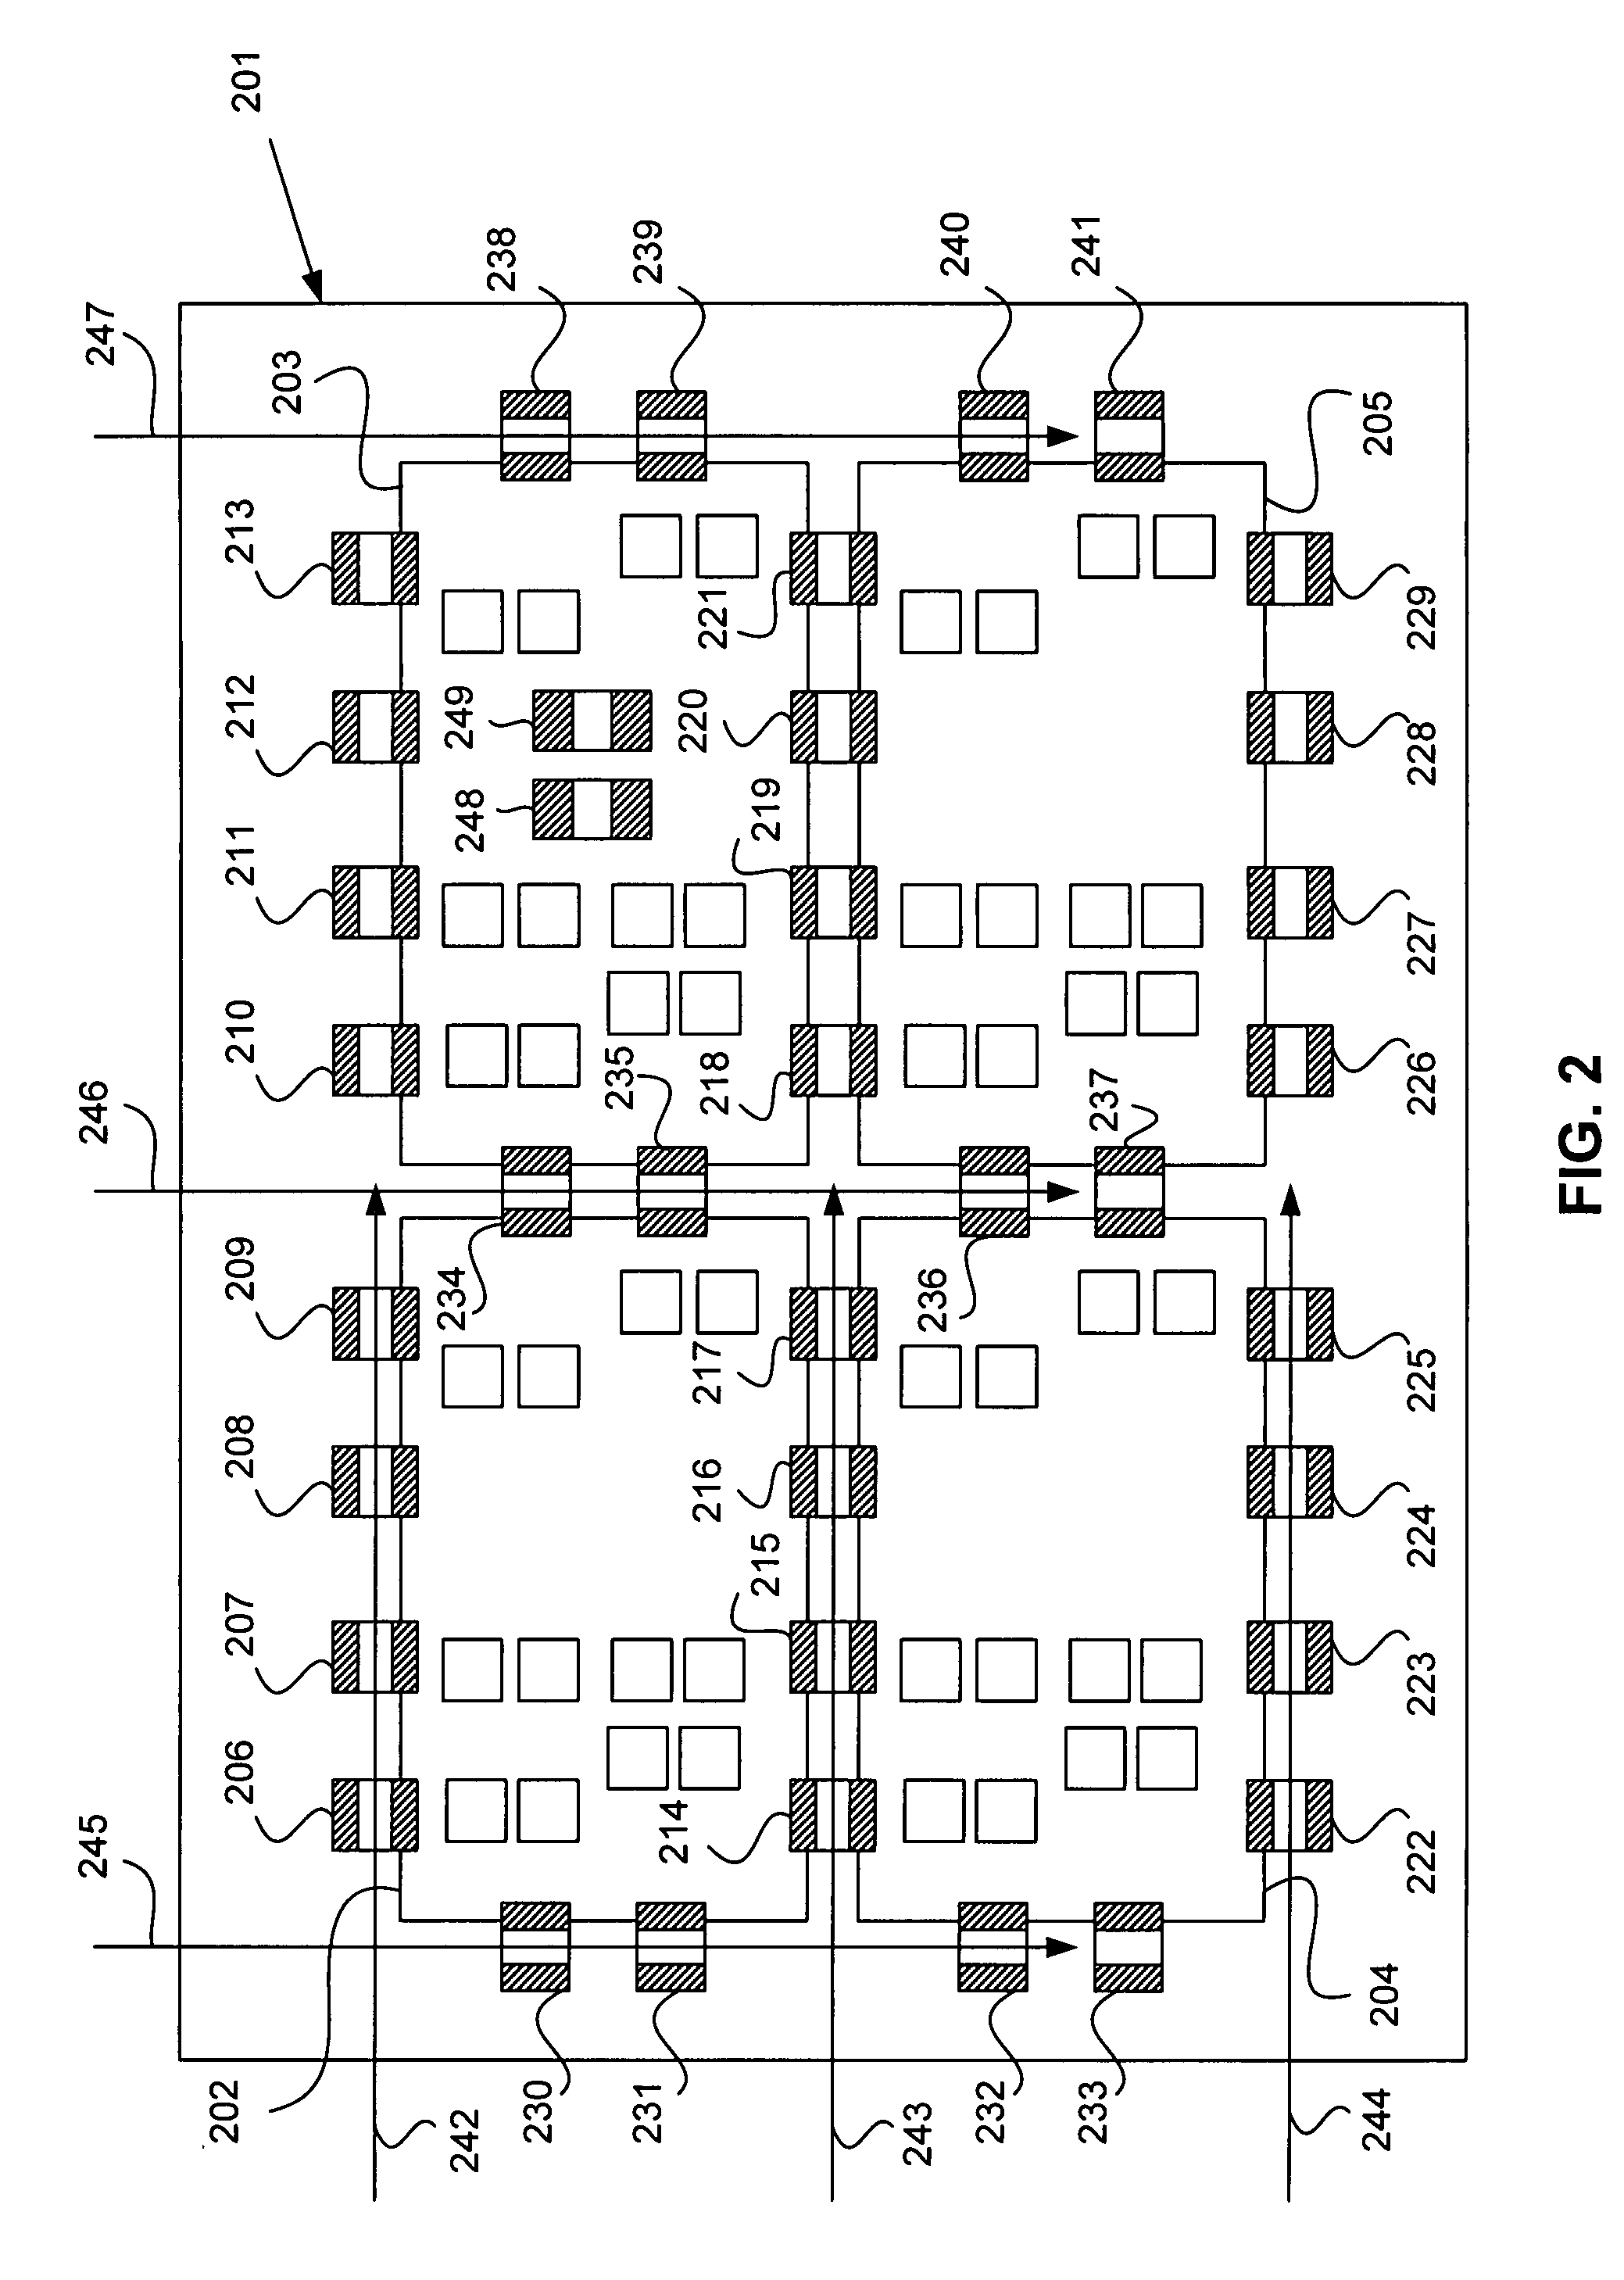 Overmolded electronic module with an integrated electromagnetic shield using SMT shield wall components